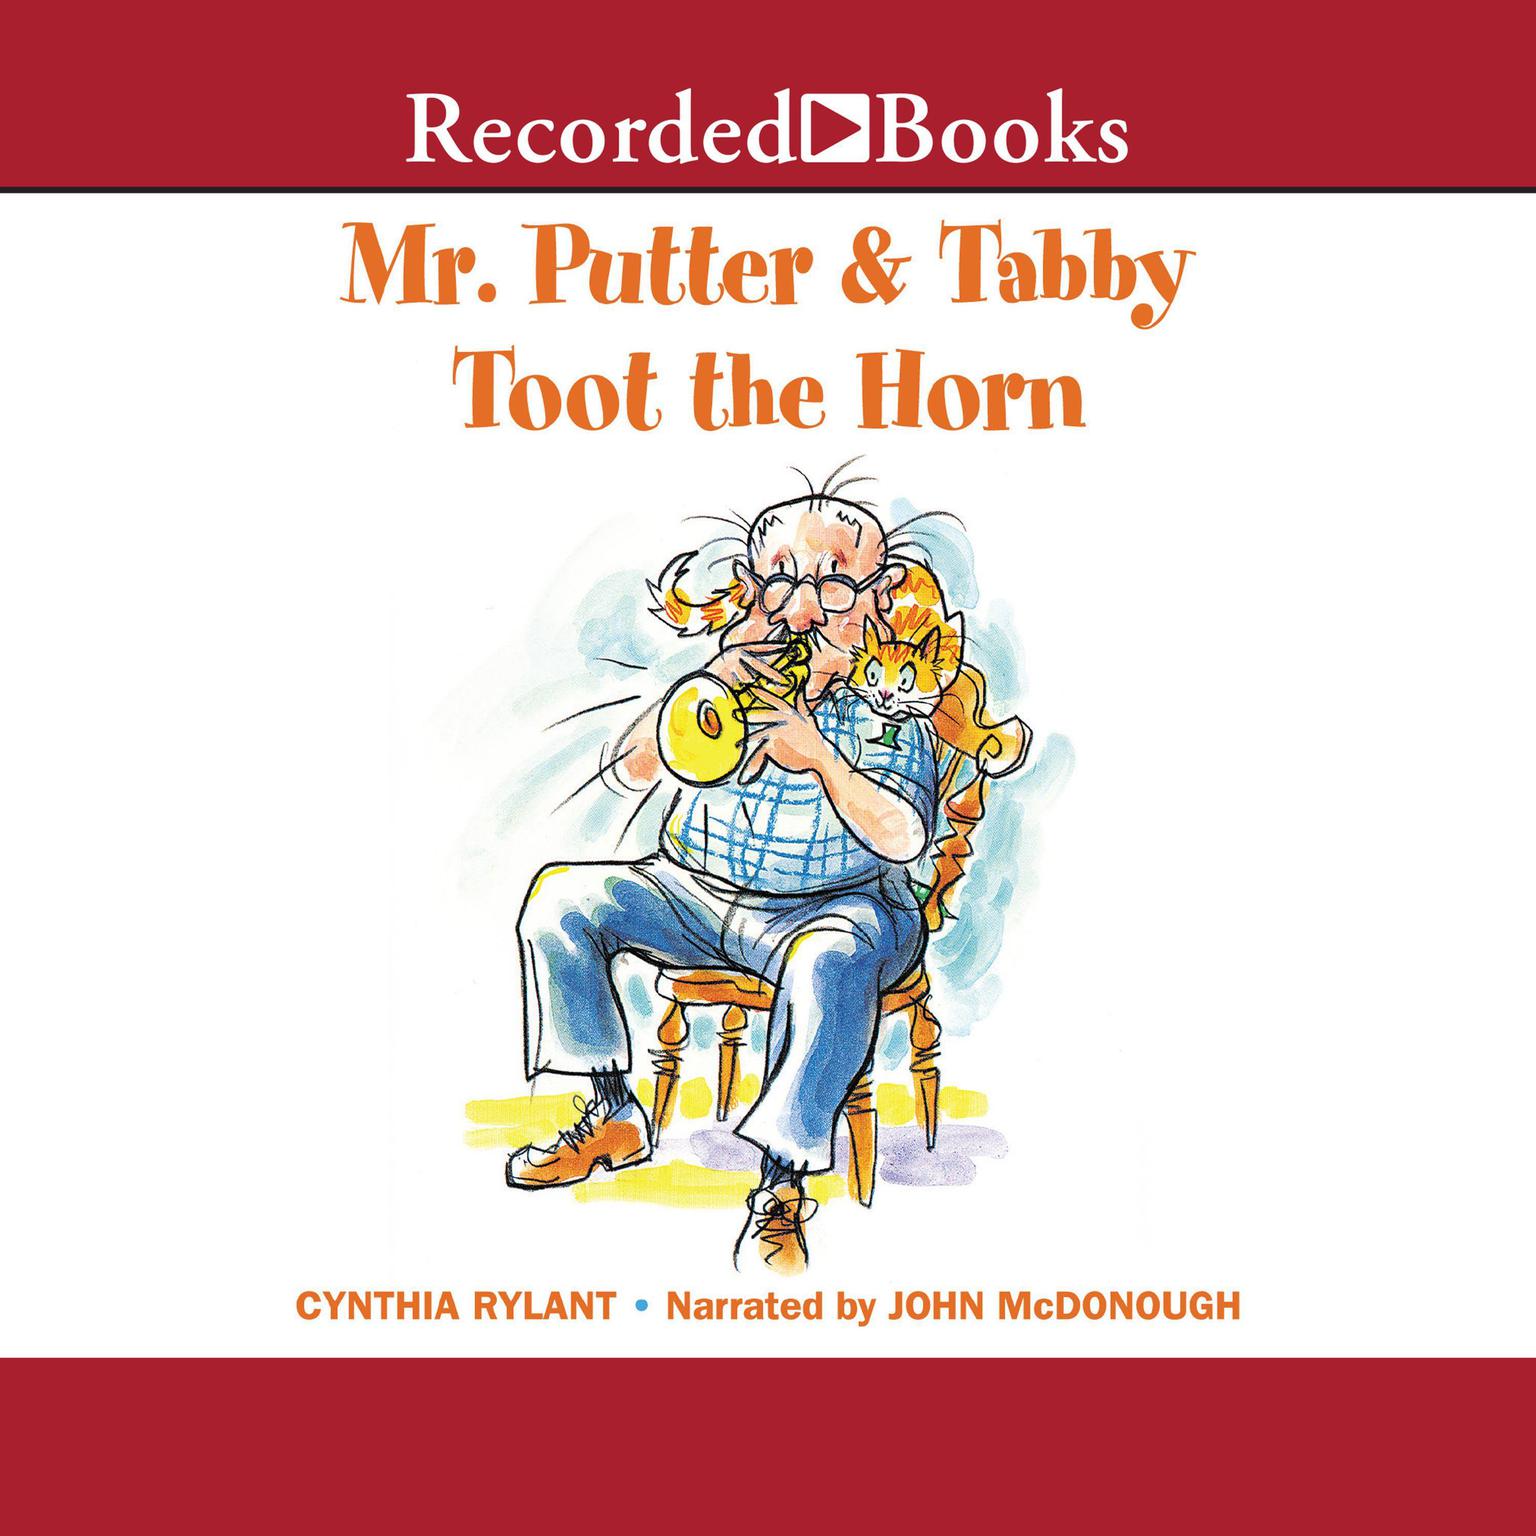 Mr. Putter & Tabby Toot the Horn Audiobook, by Cynthia Rylant